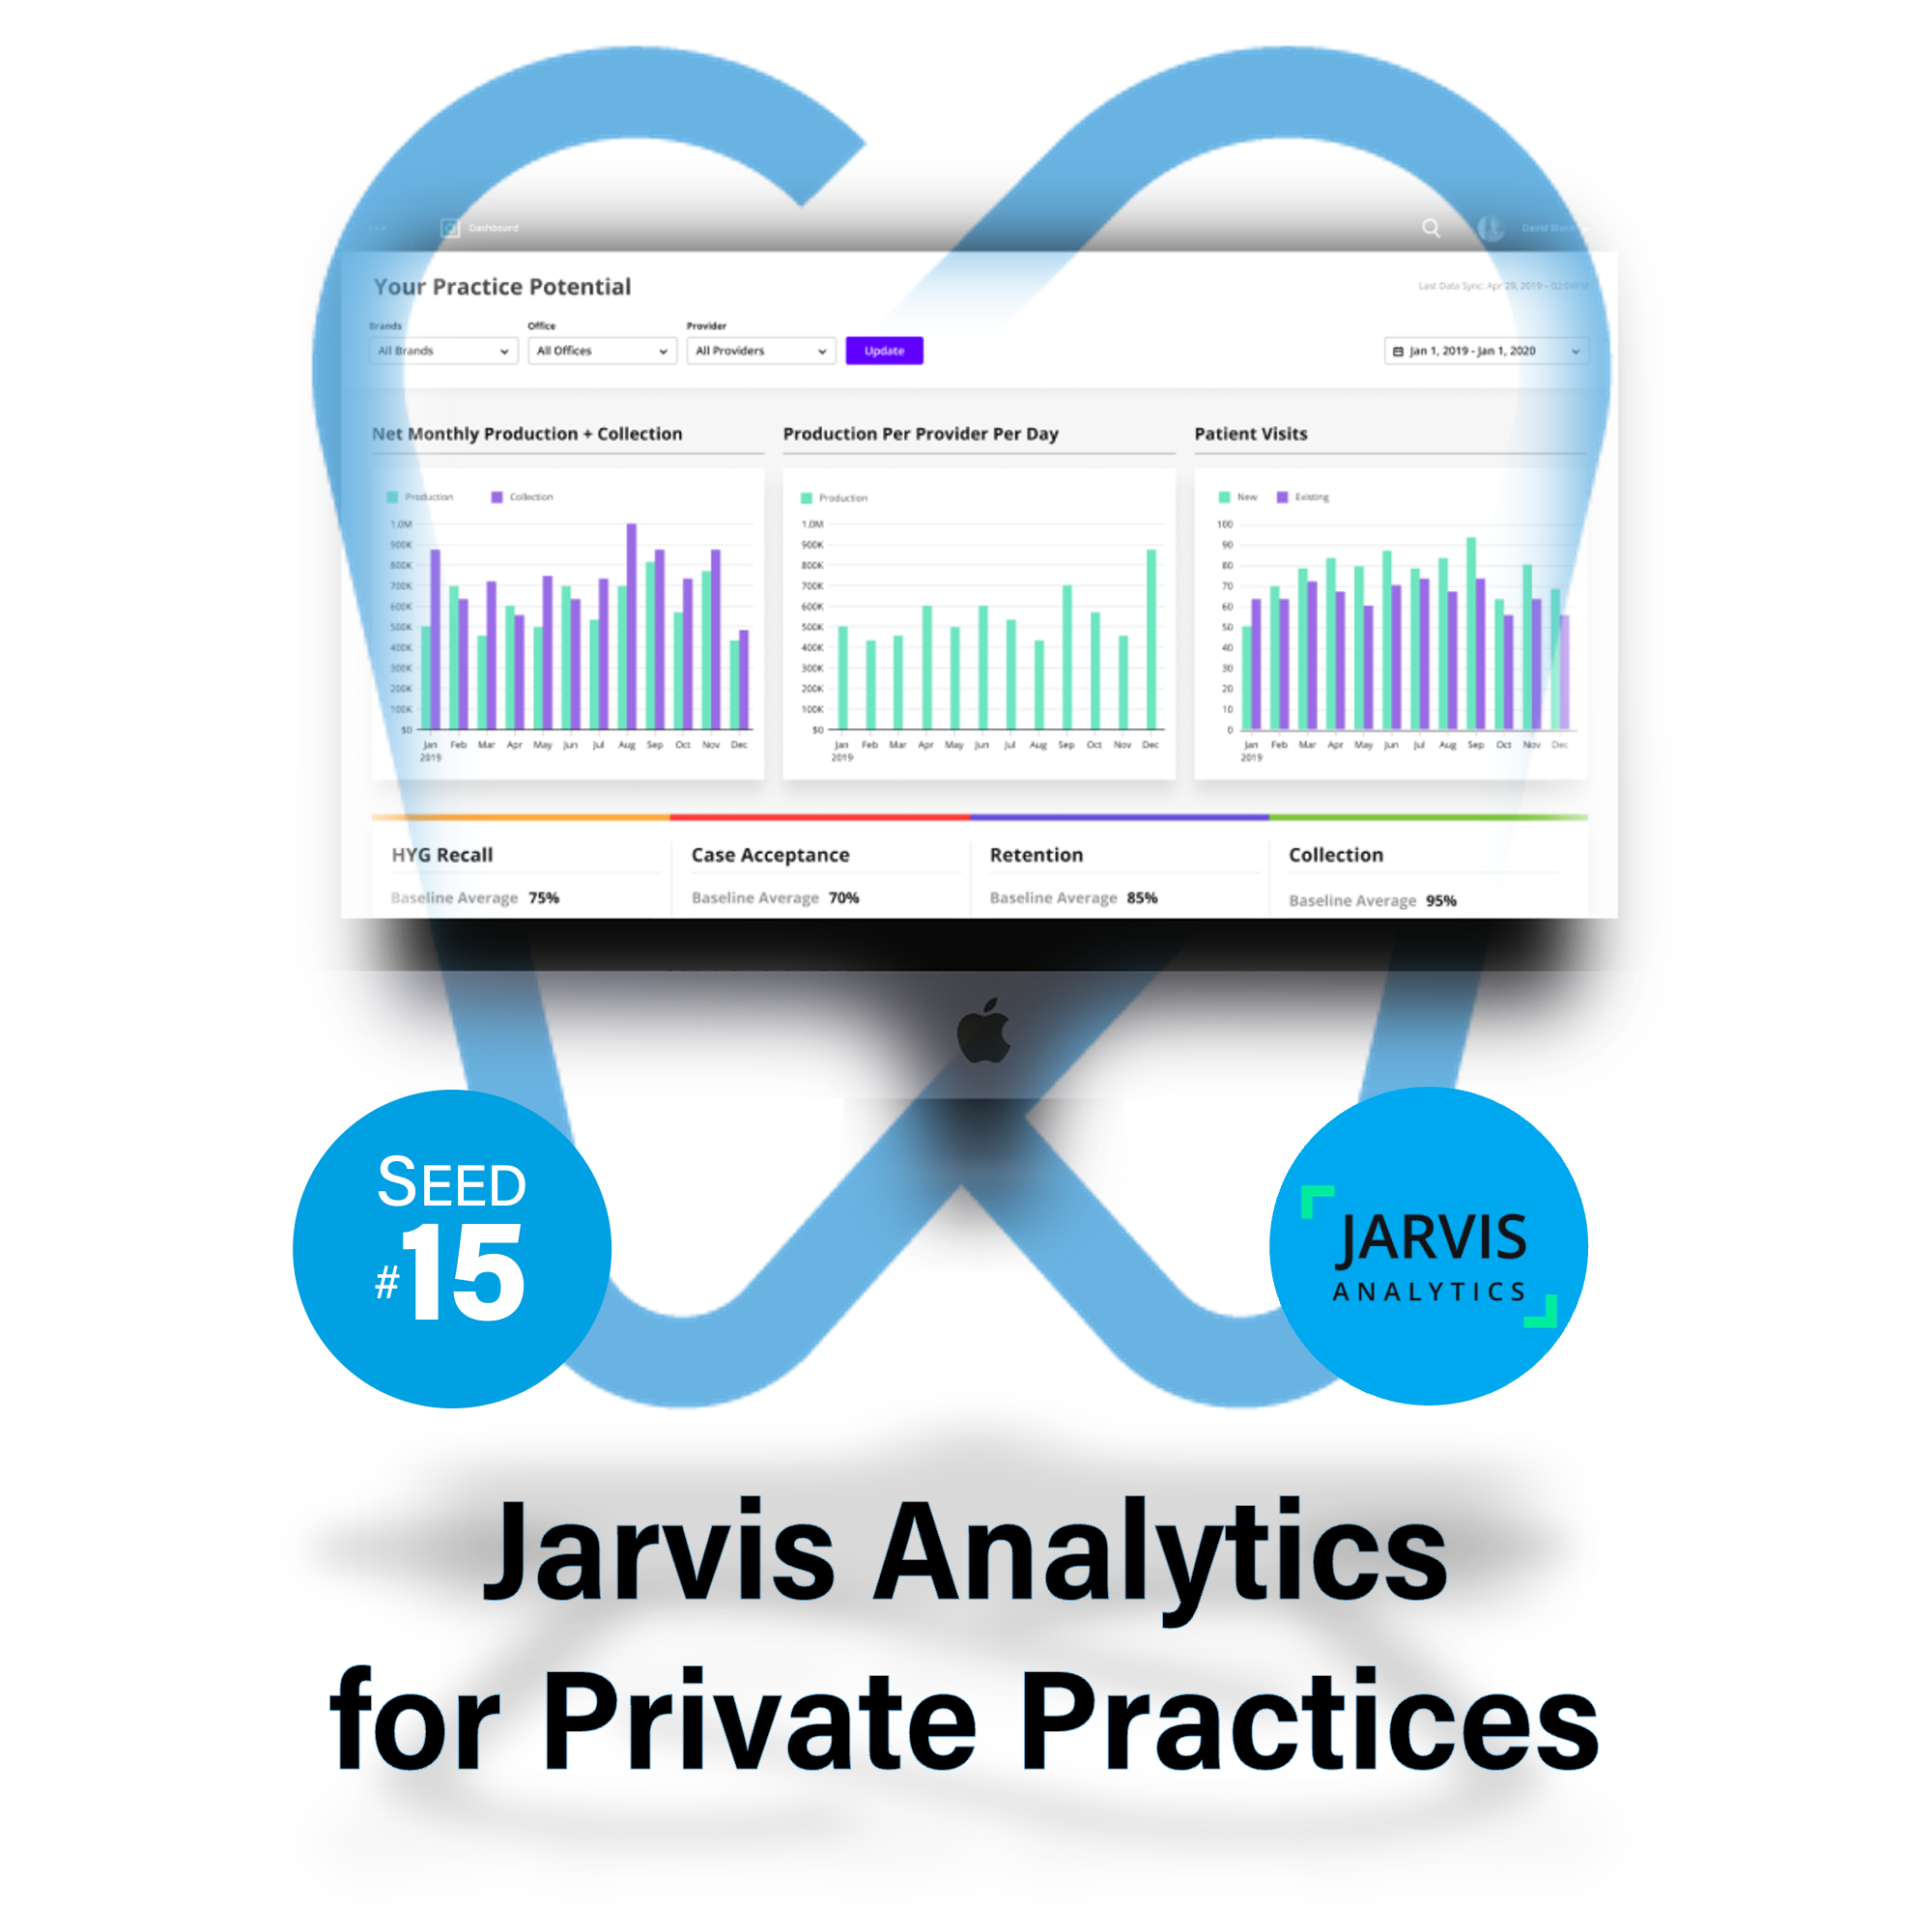 Jarvis Analytics for Private Practice